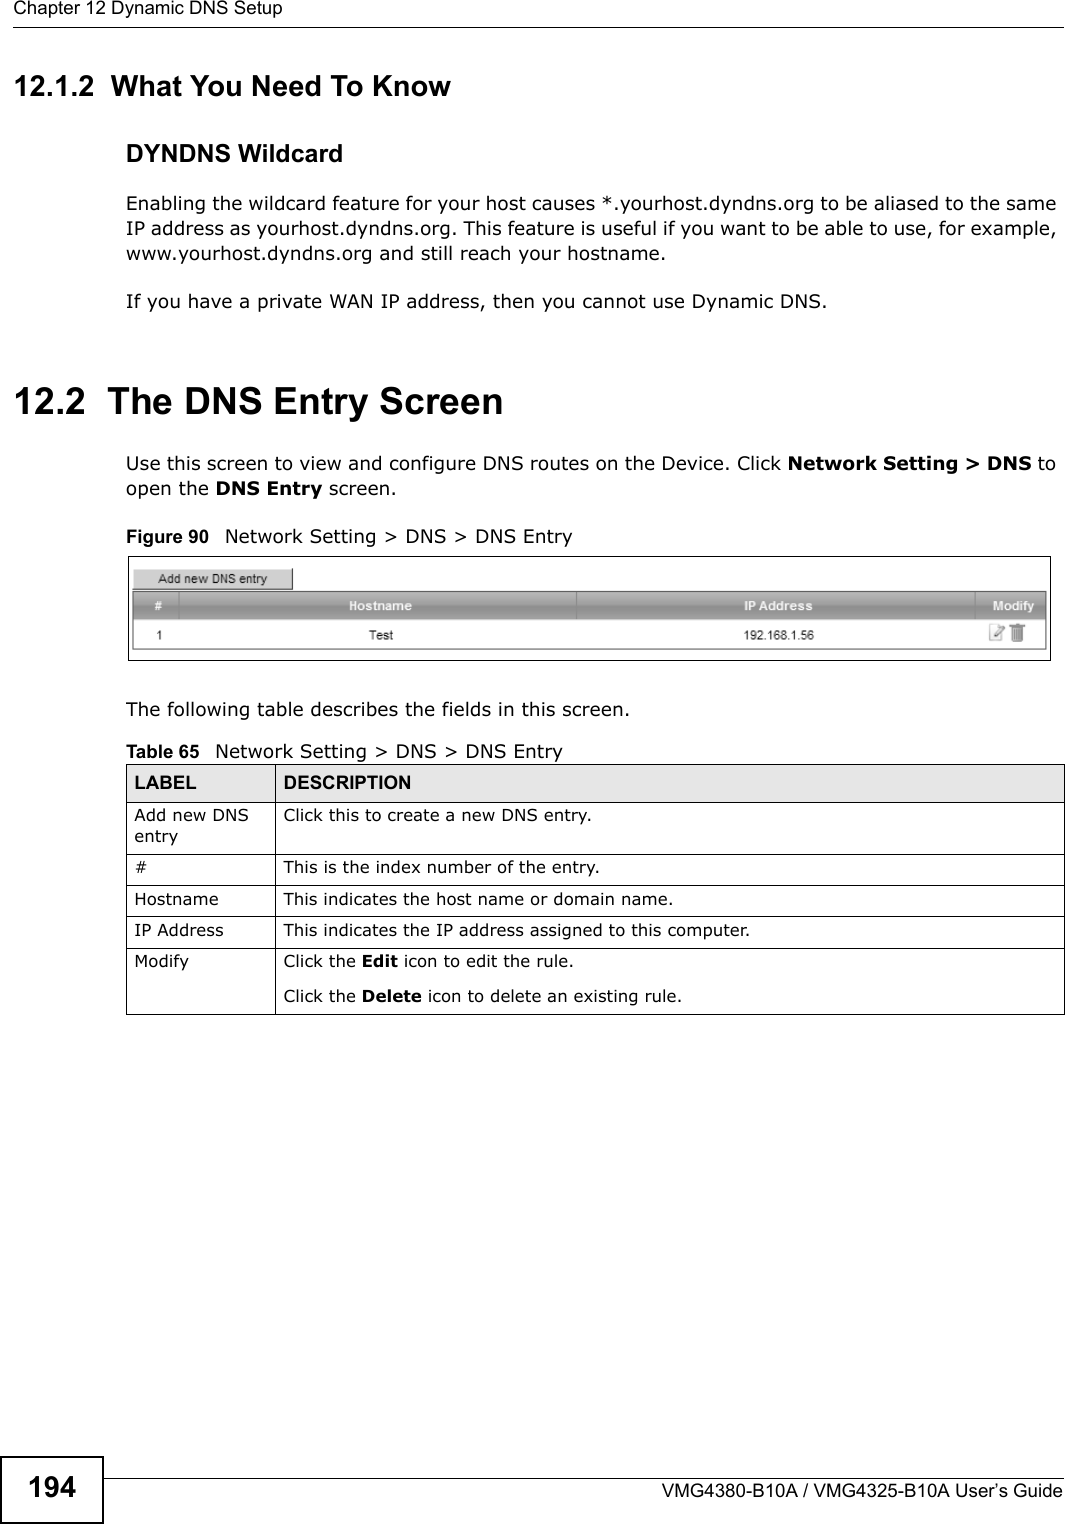 Chapter 12 Dynamic DNS SetupVMG4380-B10A / VMG4325-B10A User’s Guide19412.1.2  What You Need To KnowDYNDNS WildcardEnabling the wildcard feature for your host causes *.yourhost.dyndns.org to be aliased to the same IP address as yourhost.dyndns.org. This feature is useful if you want to be able to use, for example, www.yourhost.dyndns.org and still reach your hostname.If you have a private WAN IP address, then you cannot use Dynamic DNS.12.2  The DNS Entry ScreenUse this screen to view and configure DNS routes on the Device. Click Network Setting &gt; DNS to open the DNS Entry screen.Figure 90   Network Setting &gt; DNS &gt; DNS EntryThe following table describes the fields in this screen. Table 65   Network Setting &gt; DNS &gt; DNS EntryLABEL DESCRIPTIONAdd new DNS entryClick this to create a new DNS entry.# This is the index number of the entry.Hostname This indicates the host name or domain name.IP Address This indicates the IP address assigned to this computer.Modify Click the Edit icon to edit the rule.Click the Delete icon to delete an existing rule.